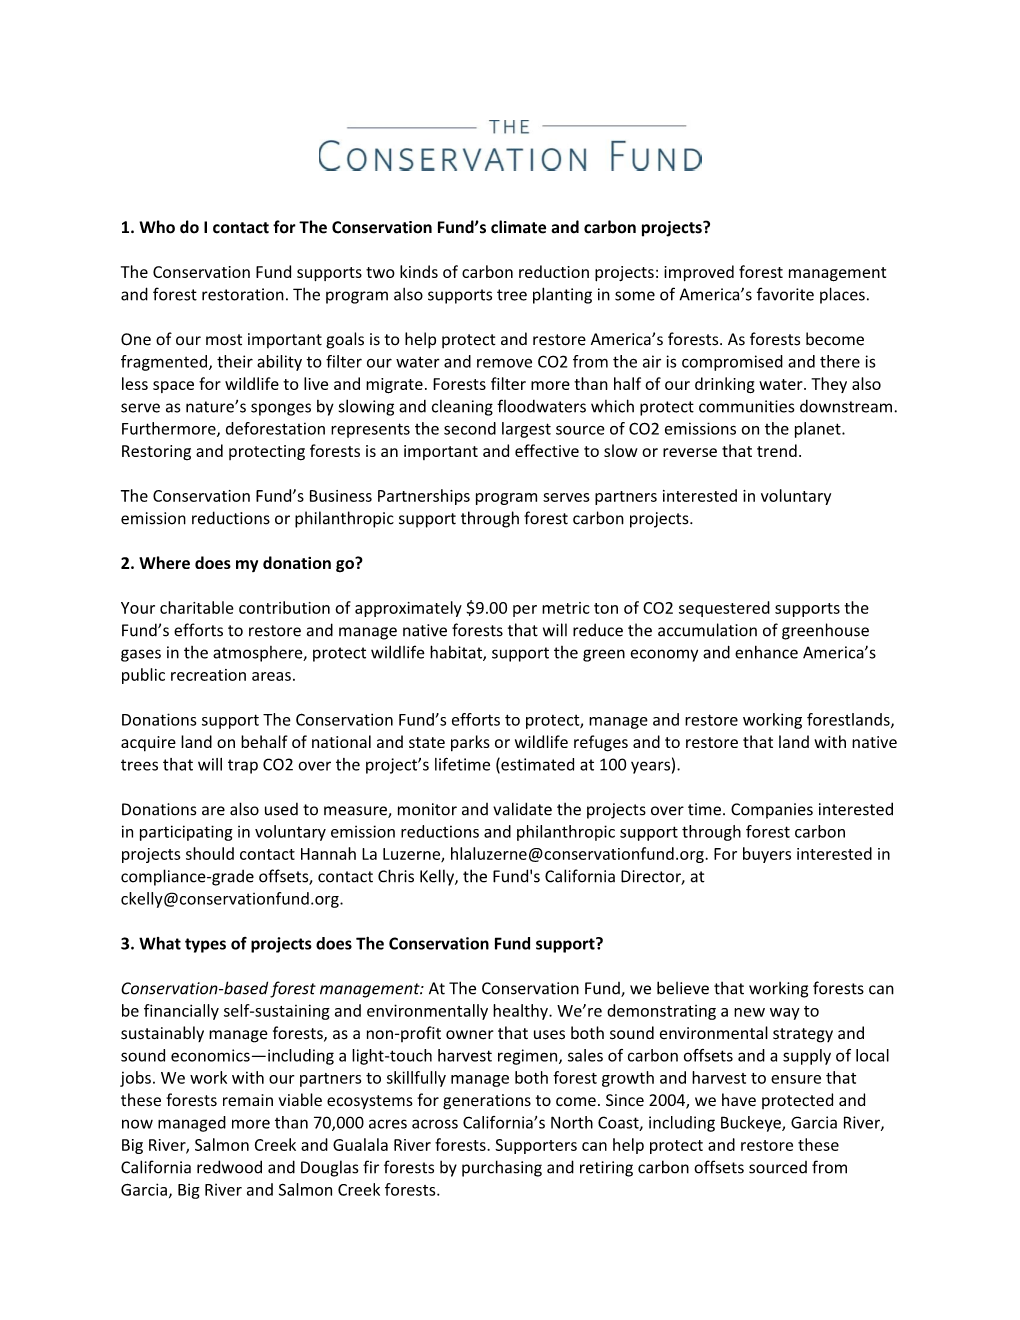 1. Who Do I Contact for the Conservation Fund's Climate And